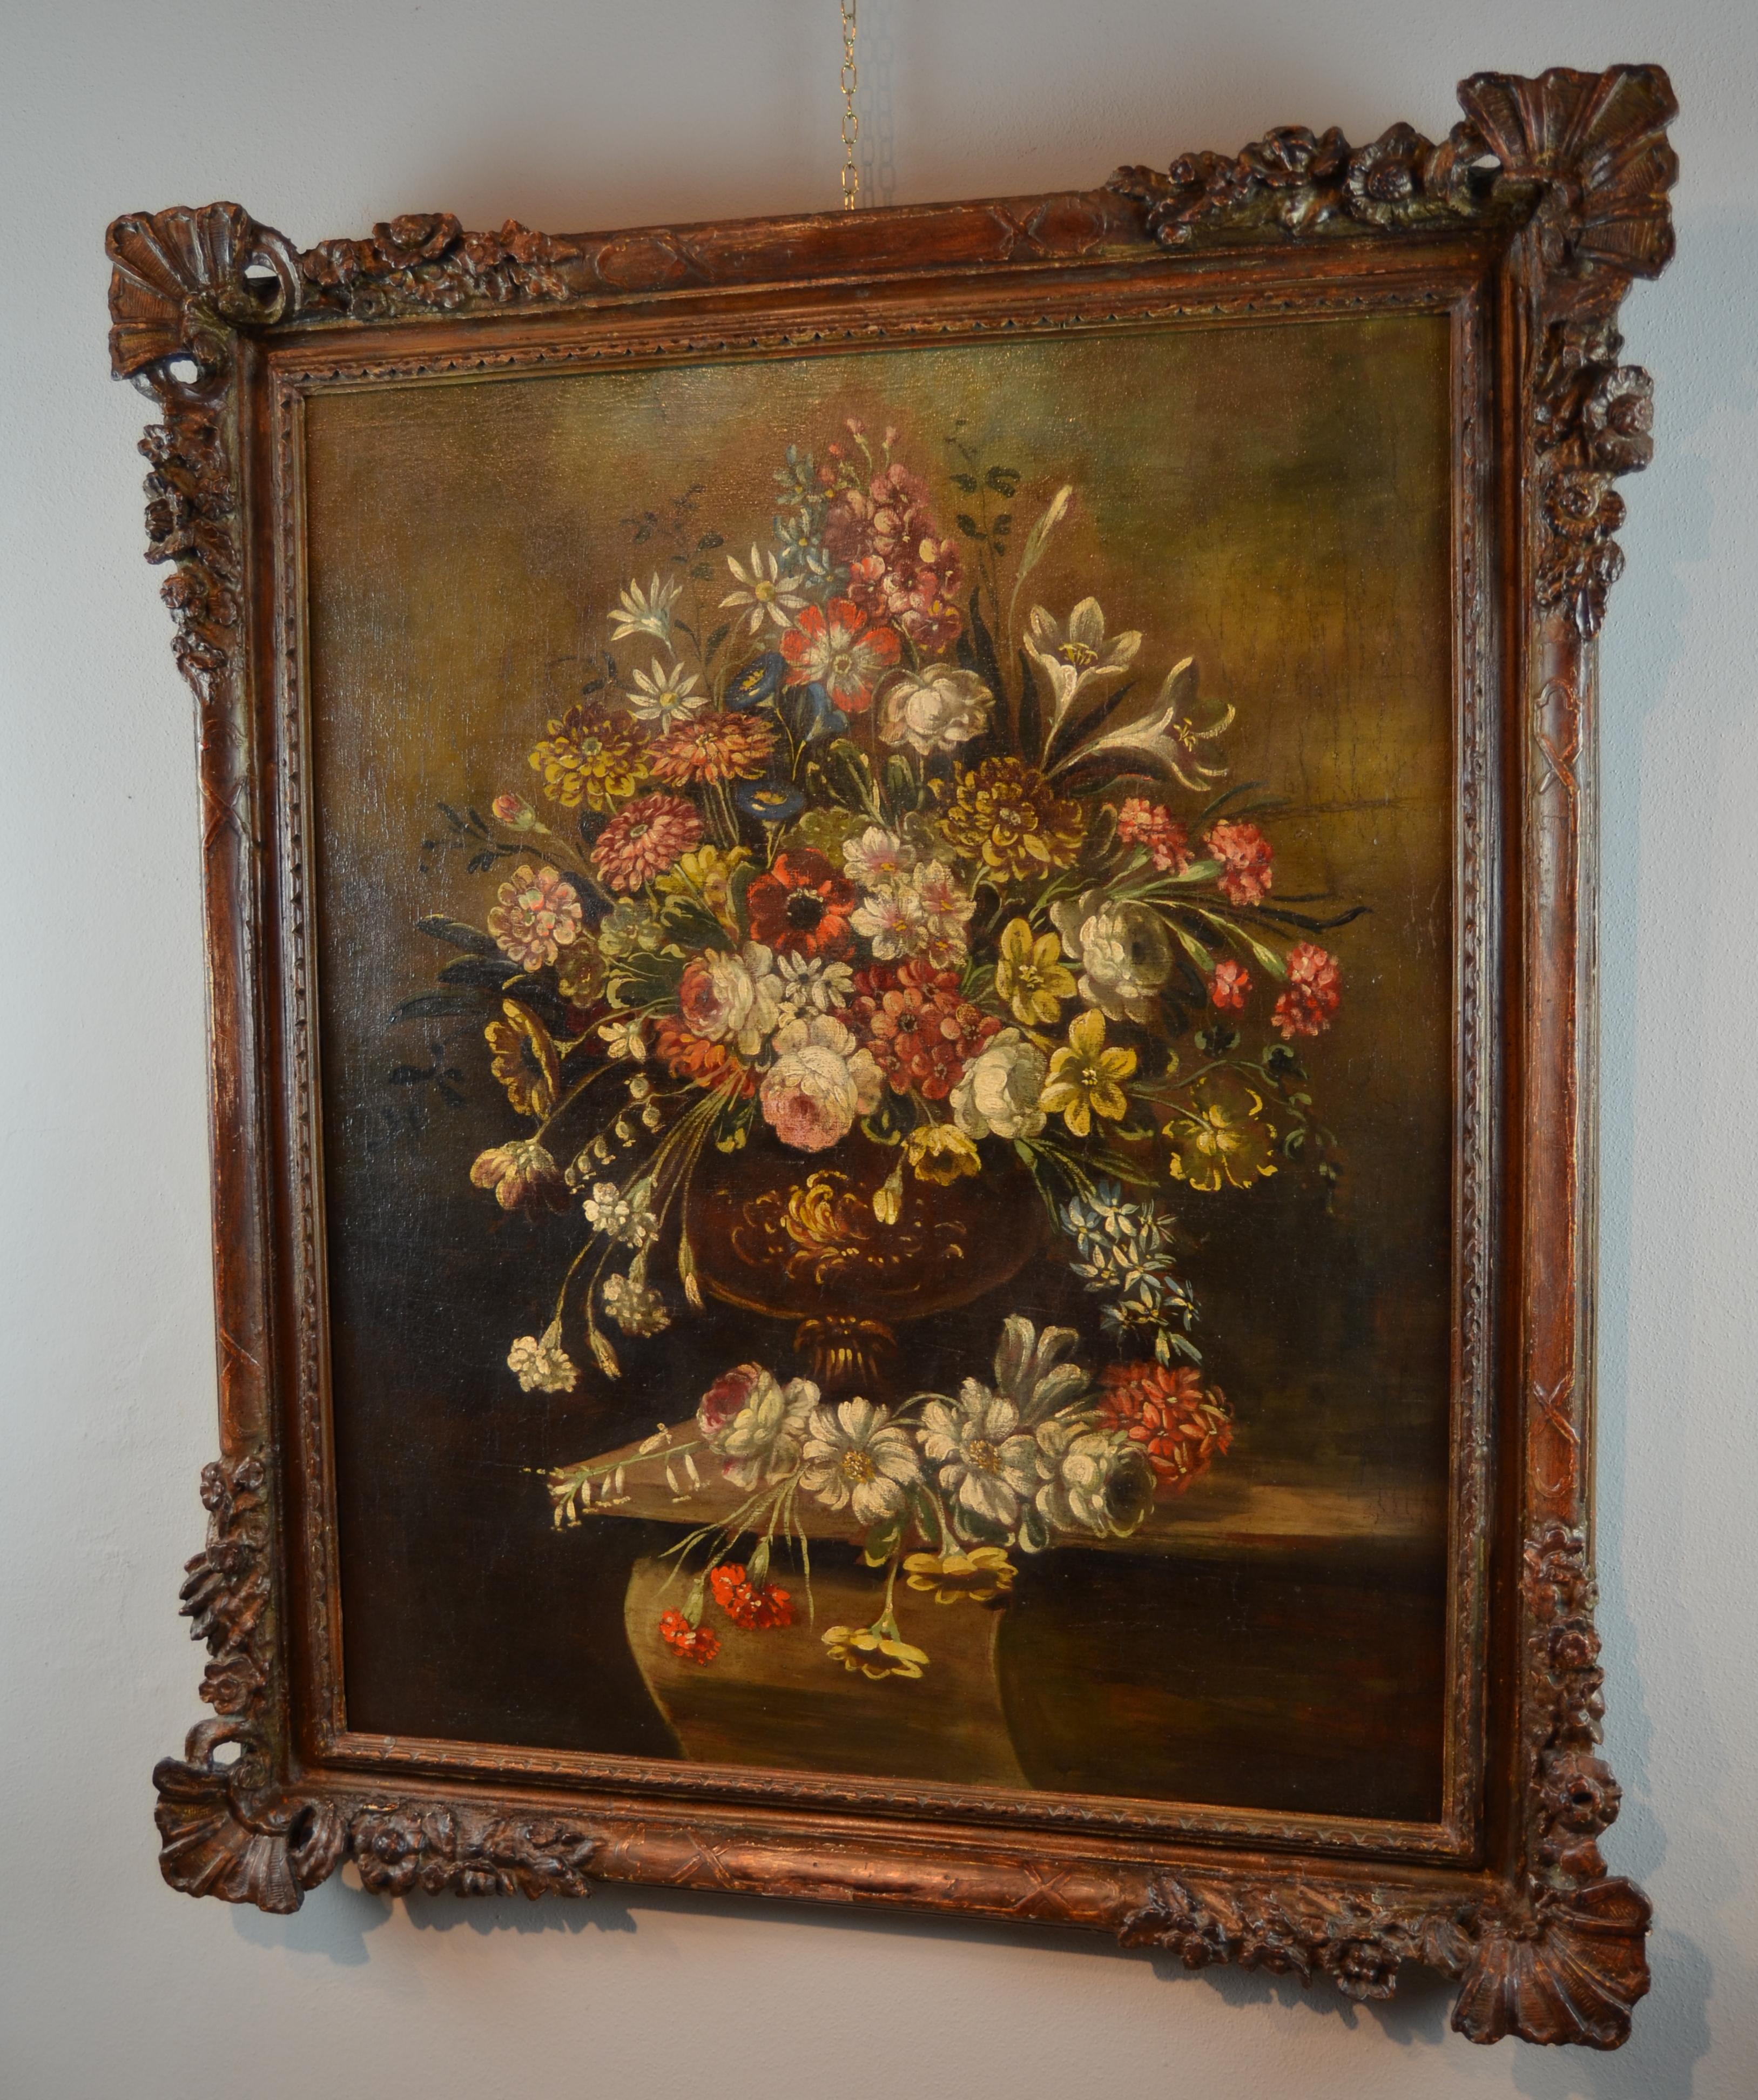 Still life with vase of flowers
Italian School of the nineteenth century

Oil on canvas
cm. 74 x 92,5
frame 97 x 112

Beautiful painting representing a rich still life, of great decorative taste, which strikes by the incredible vivacity and the